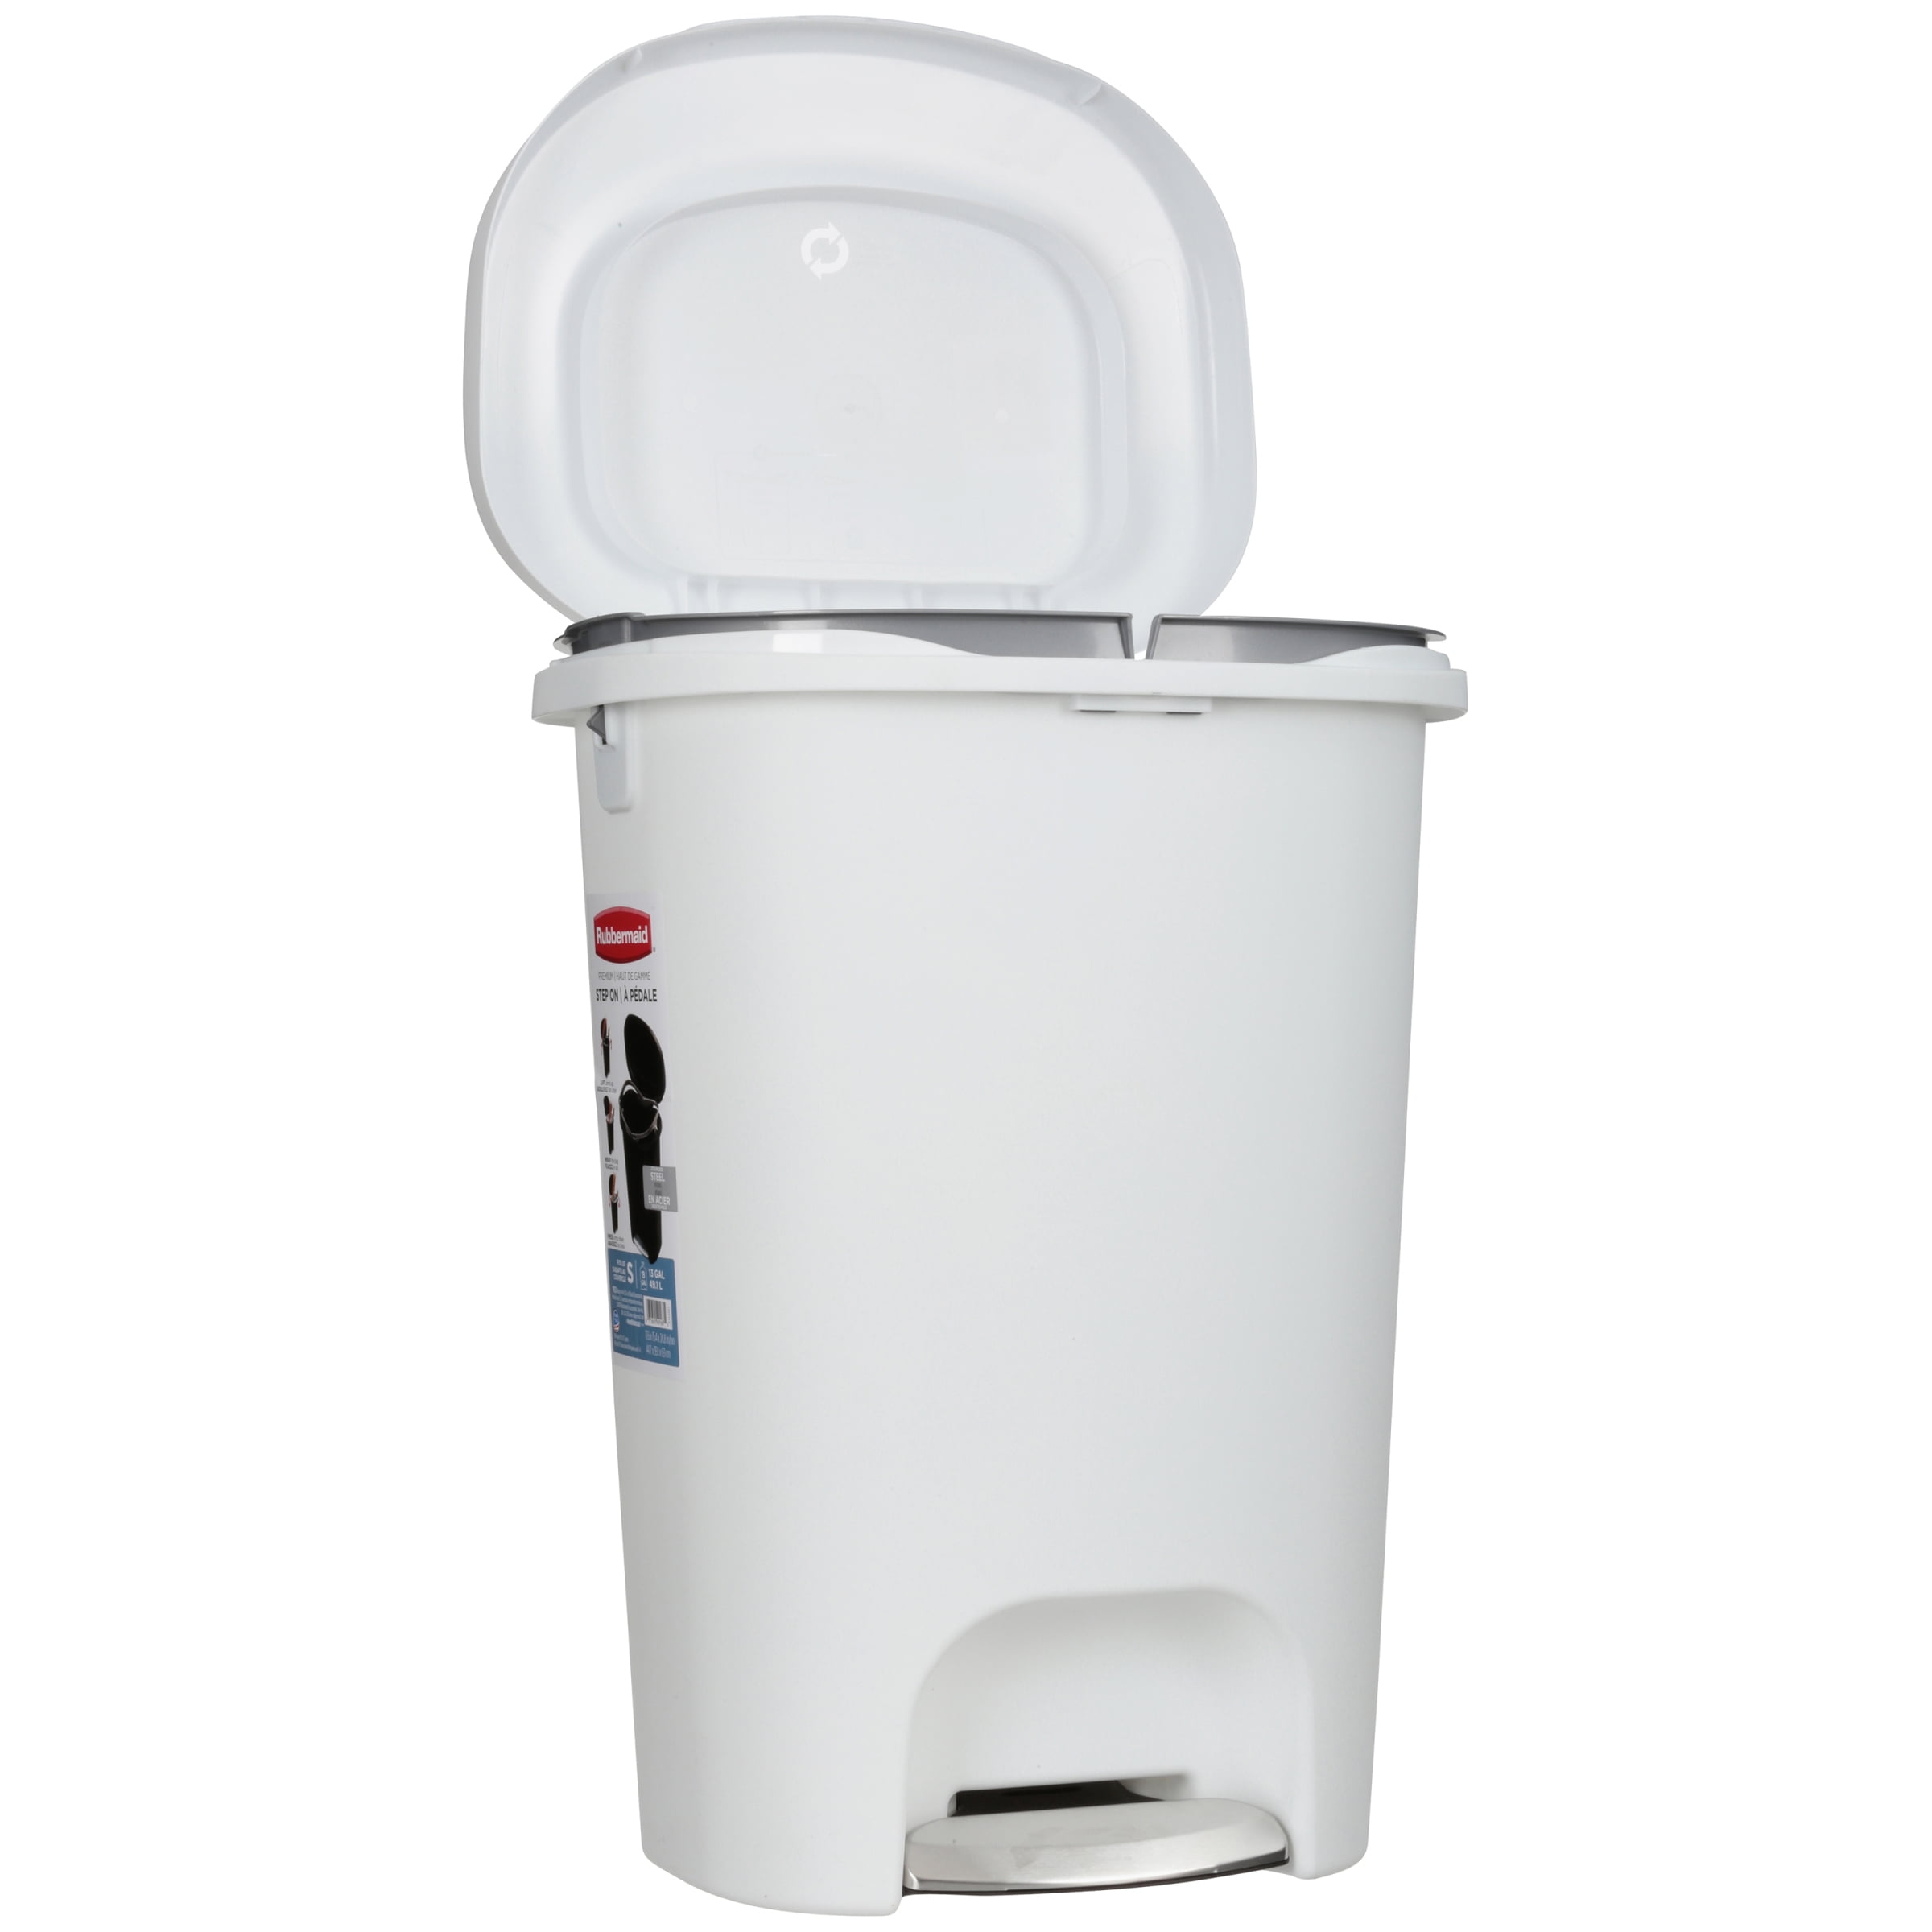 Rubbermaid Classic 13 Gallon Premium Step-On Trash Can with Lid and  Stainless-Steel Pedal, White Waste Bin for Kitchen